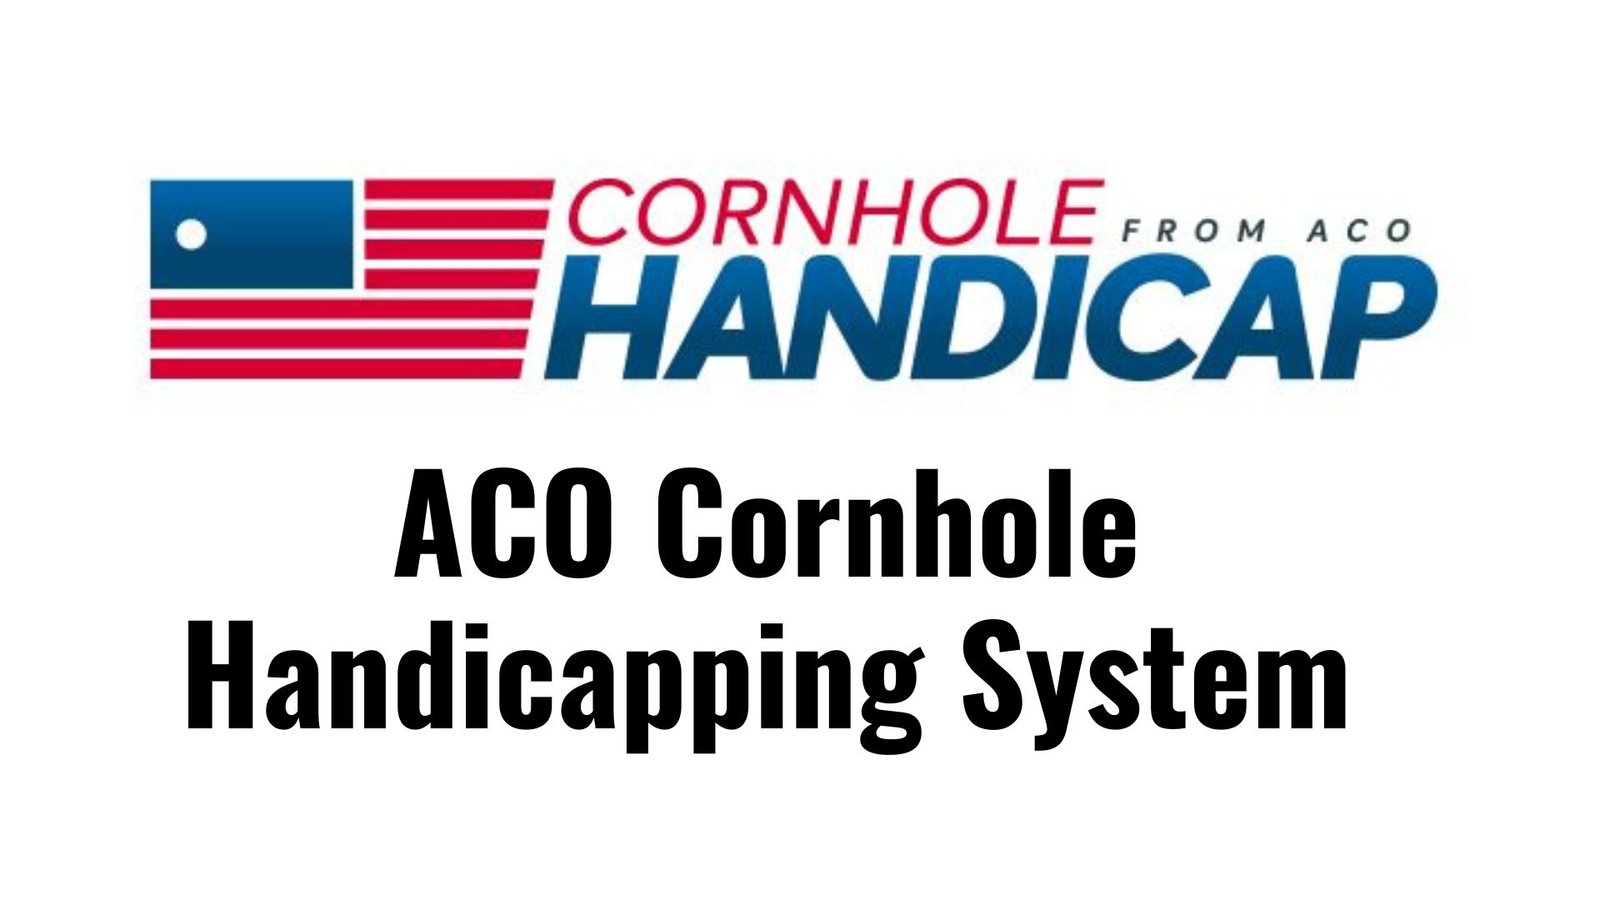 ACO Cornhole Handicapping System Introduced